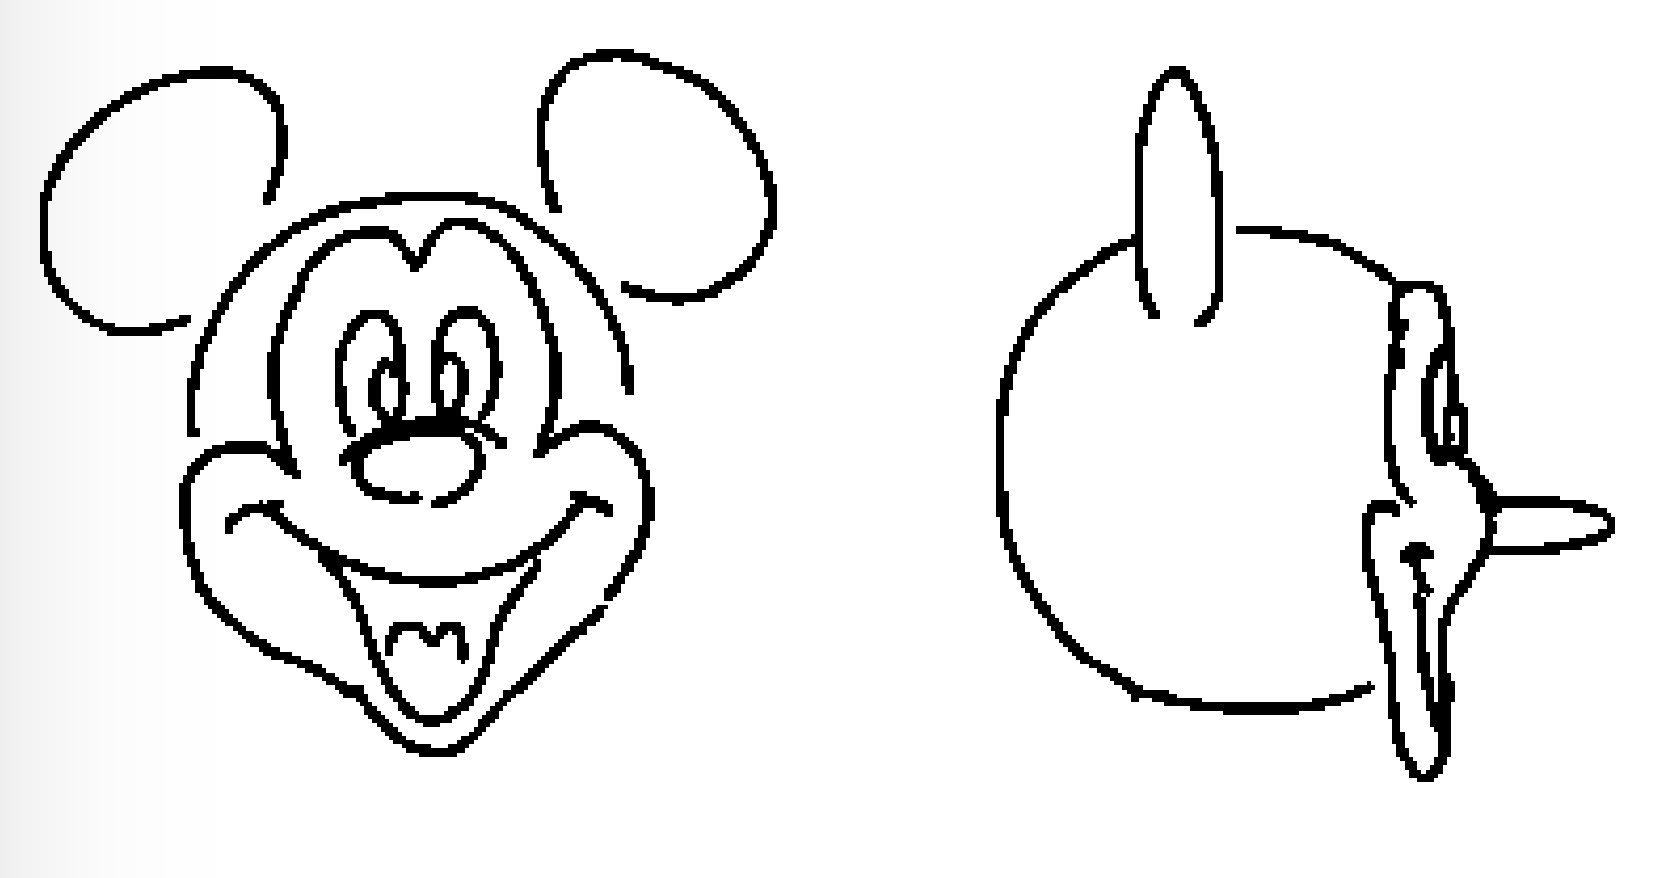 How to draw Mickey Mouse face drawing step by step - YouTube